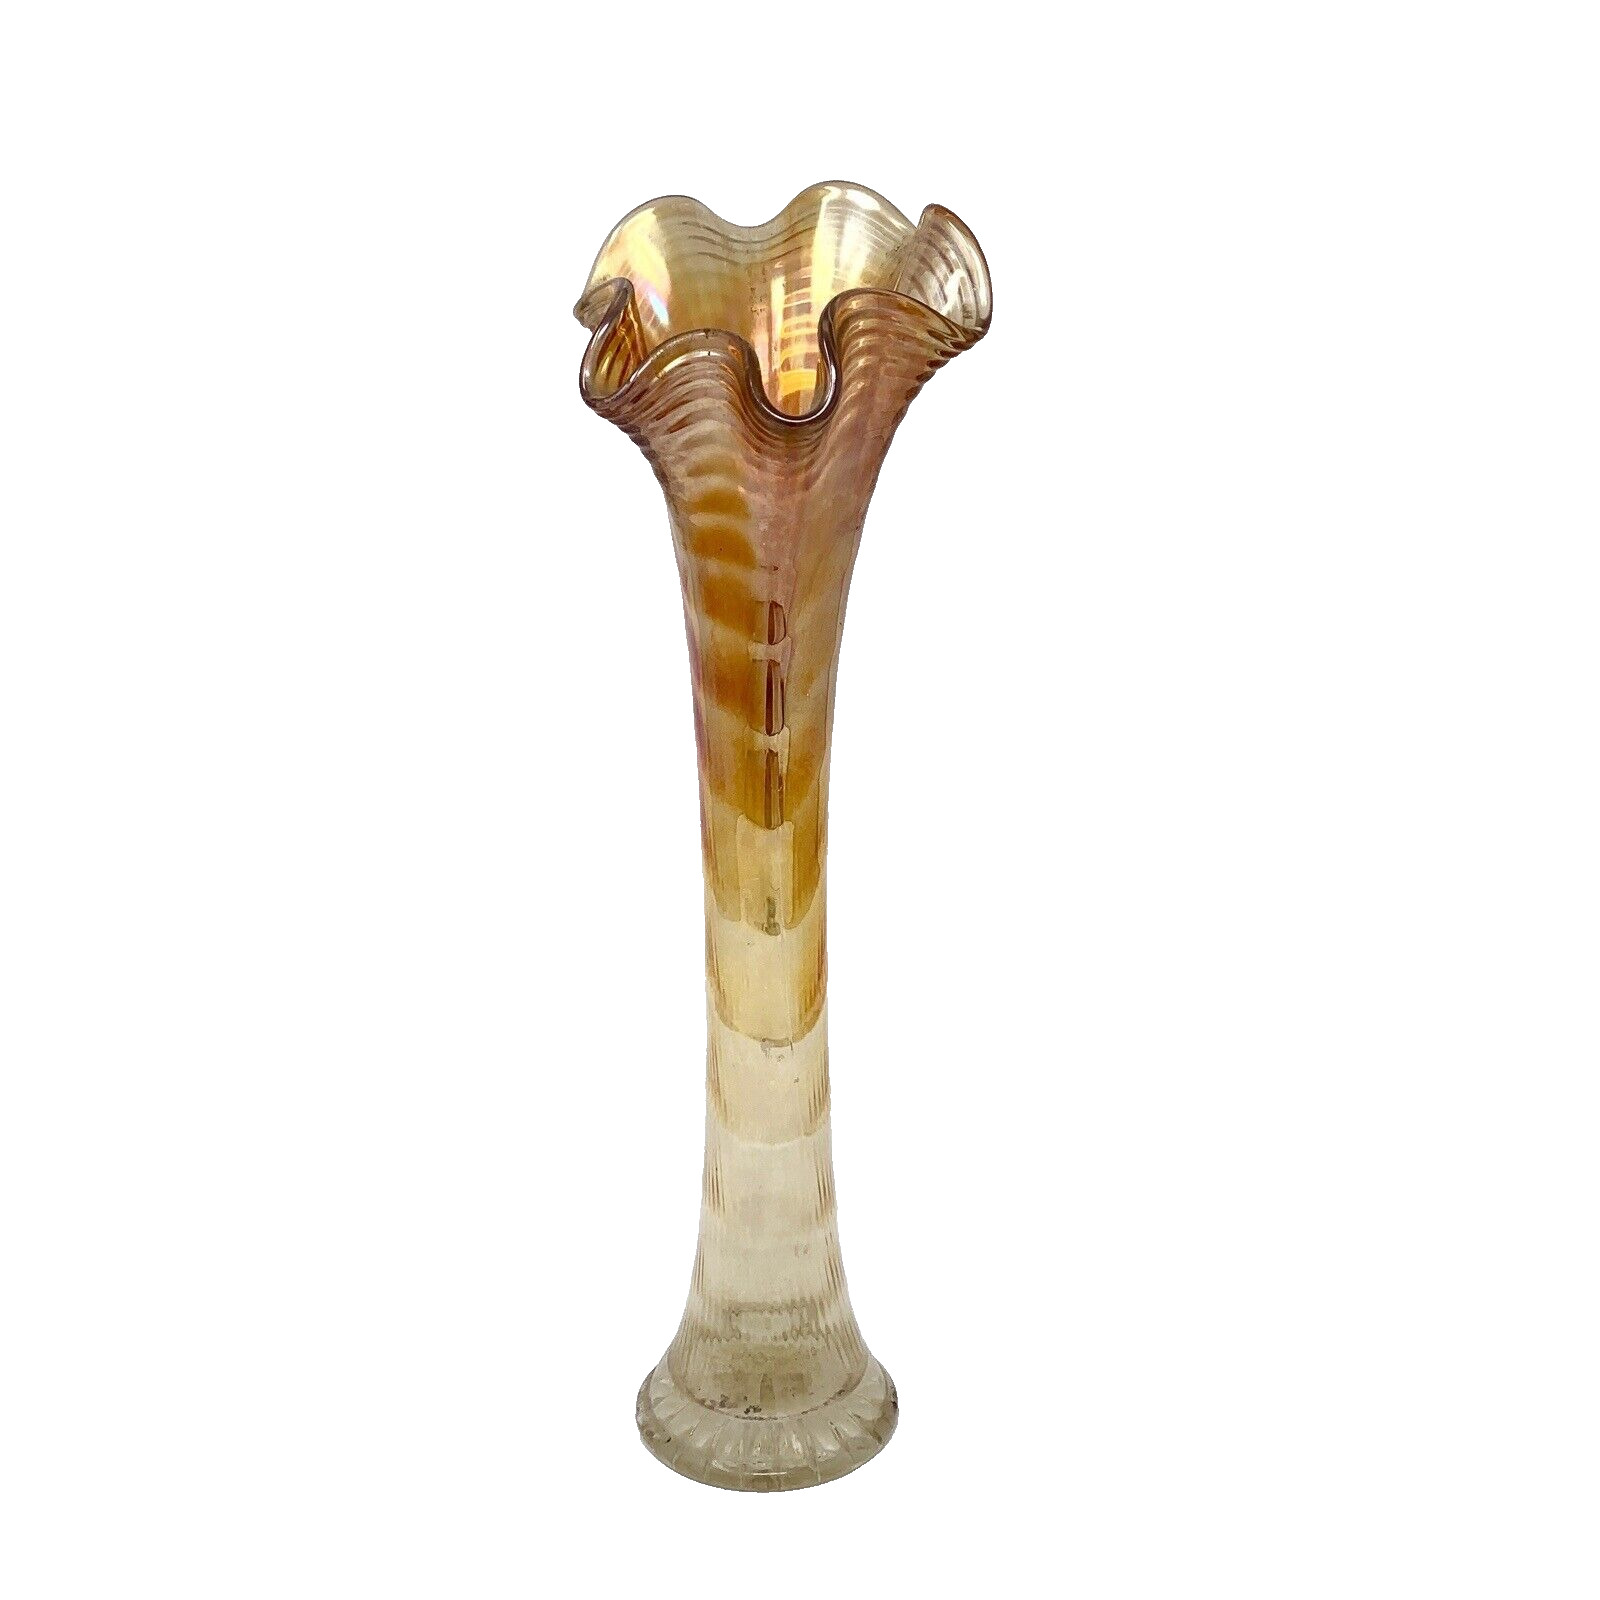 Imperial Carnival Swung Marigold Iridescent Tall Ripple Pattern Vase. 14”